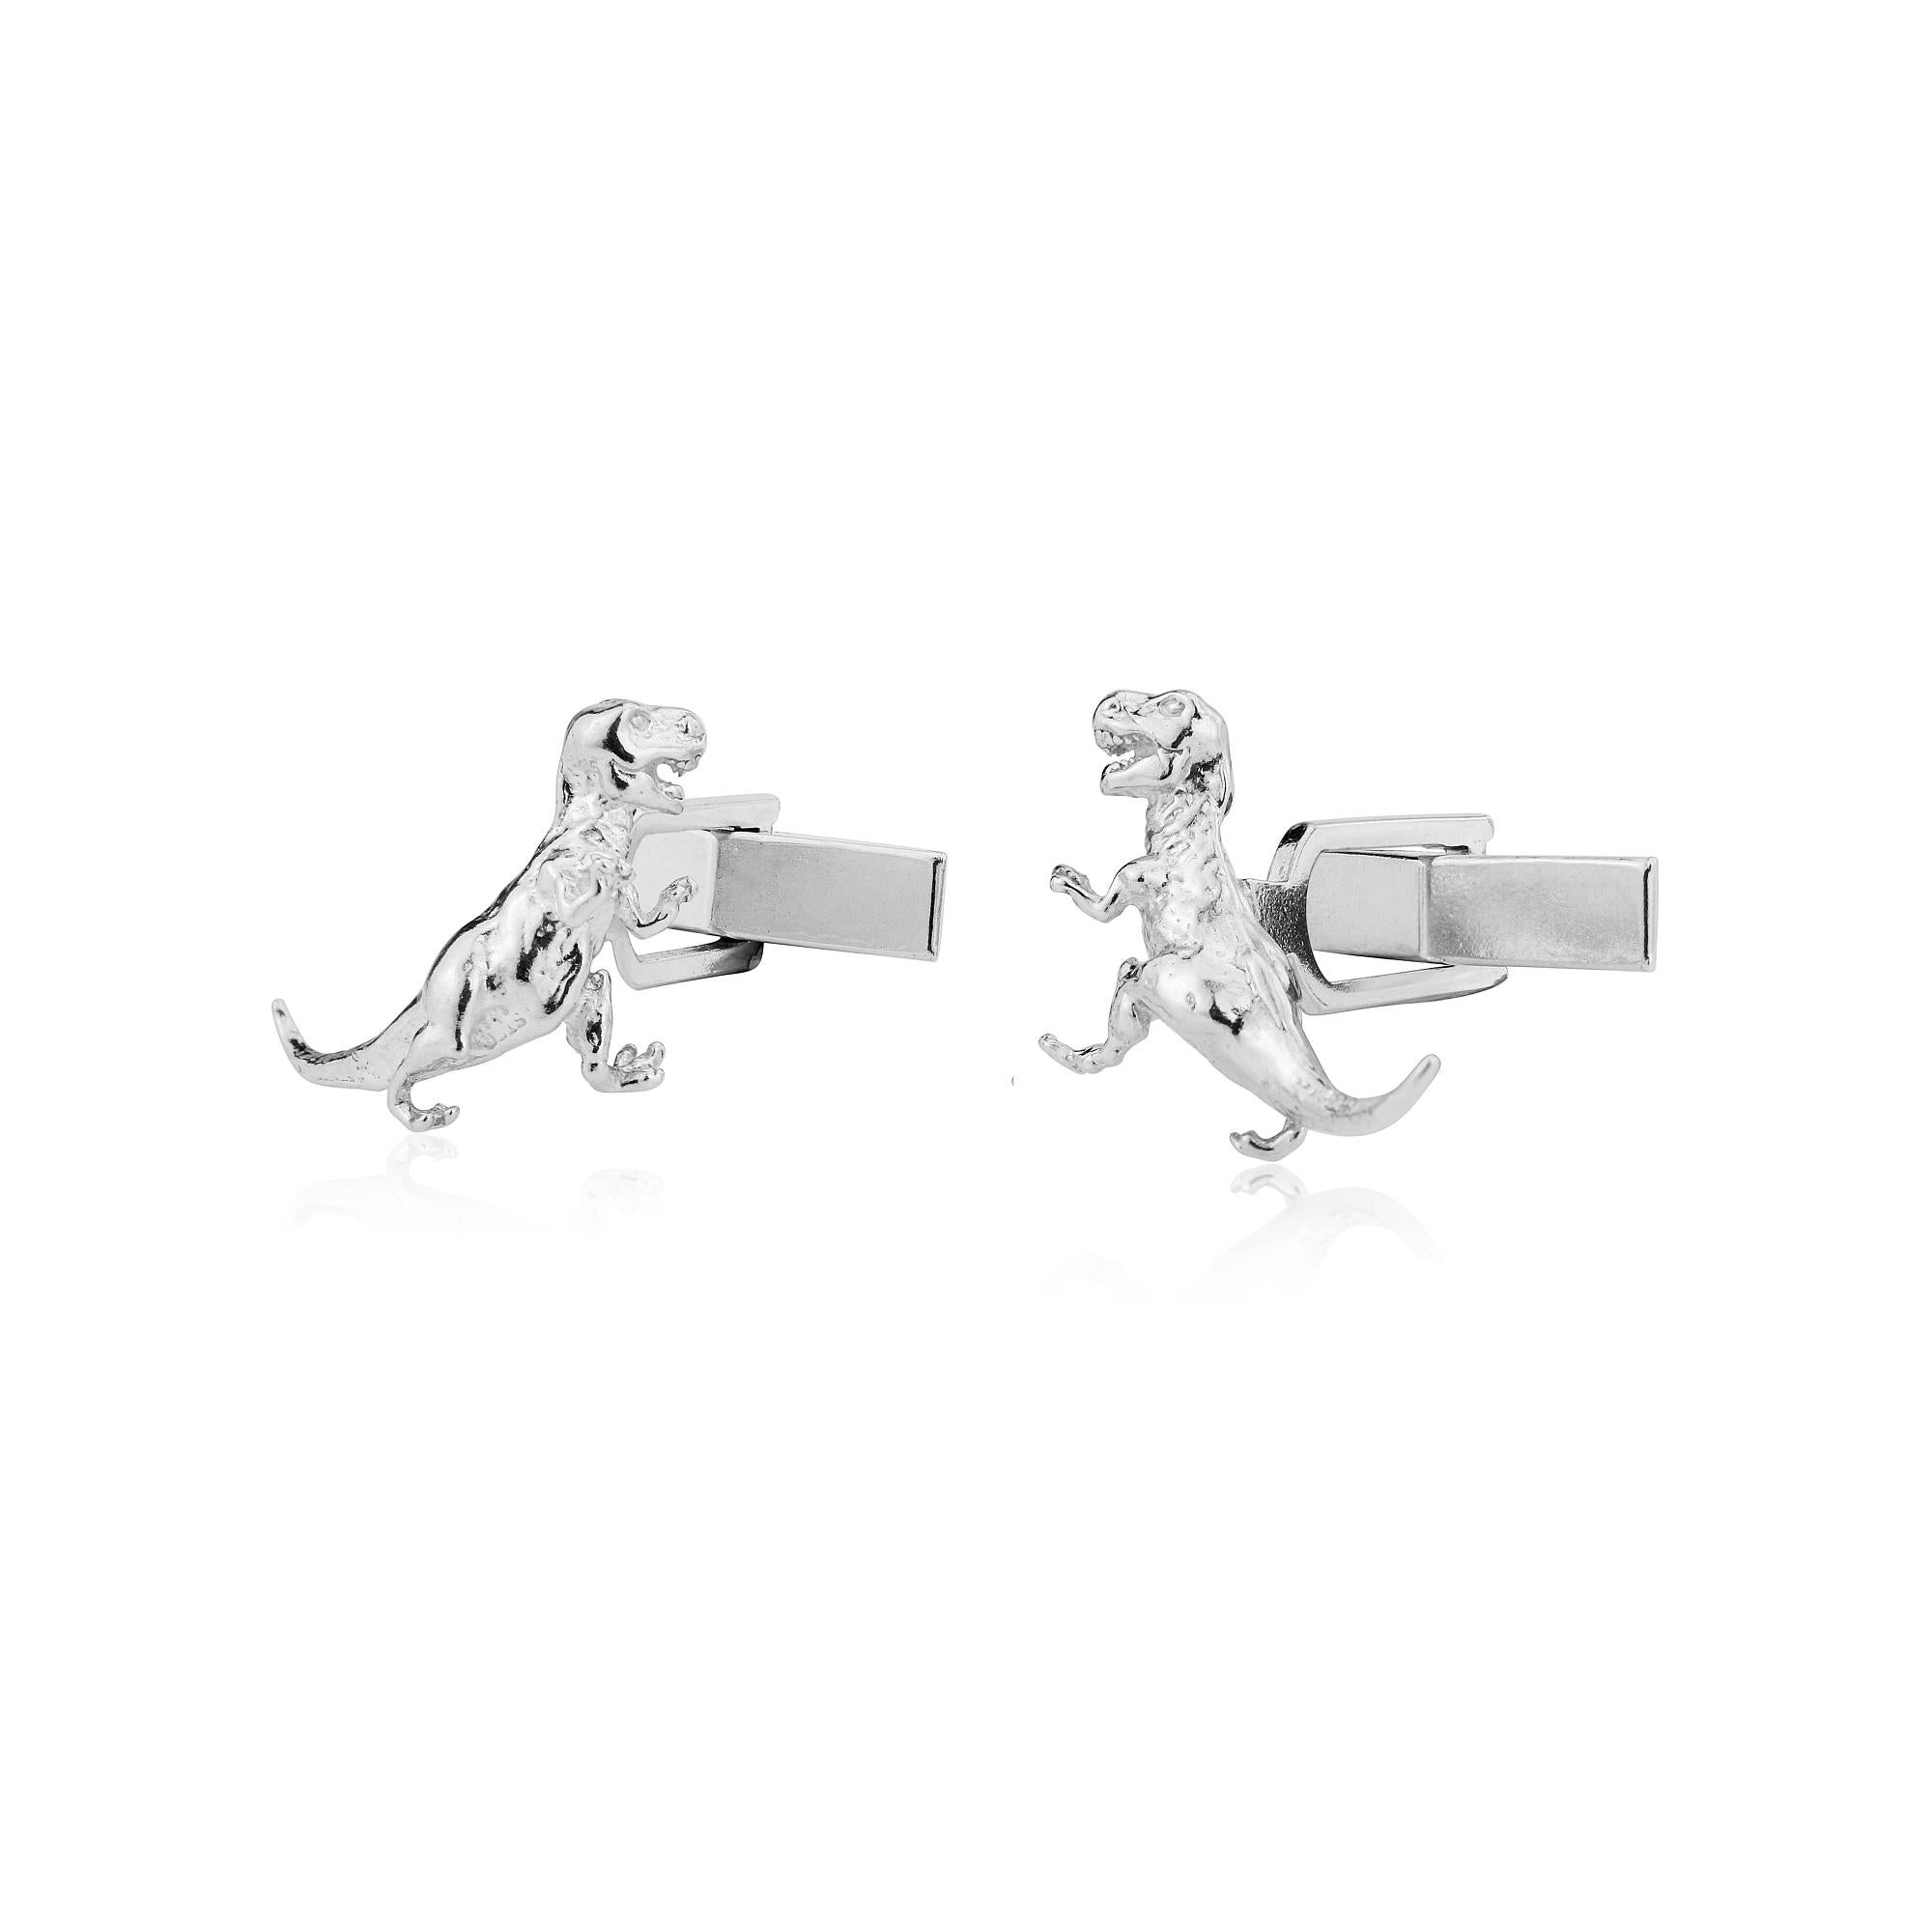 Simon Kemp , a third generation English jeweller,  has taken a vintage charm, made it into a mould, and turned this into a pair of highly detailed sterling silver cufflinks.
This miniature sculpture captures the essence of this dinosaur which ruled